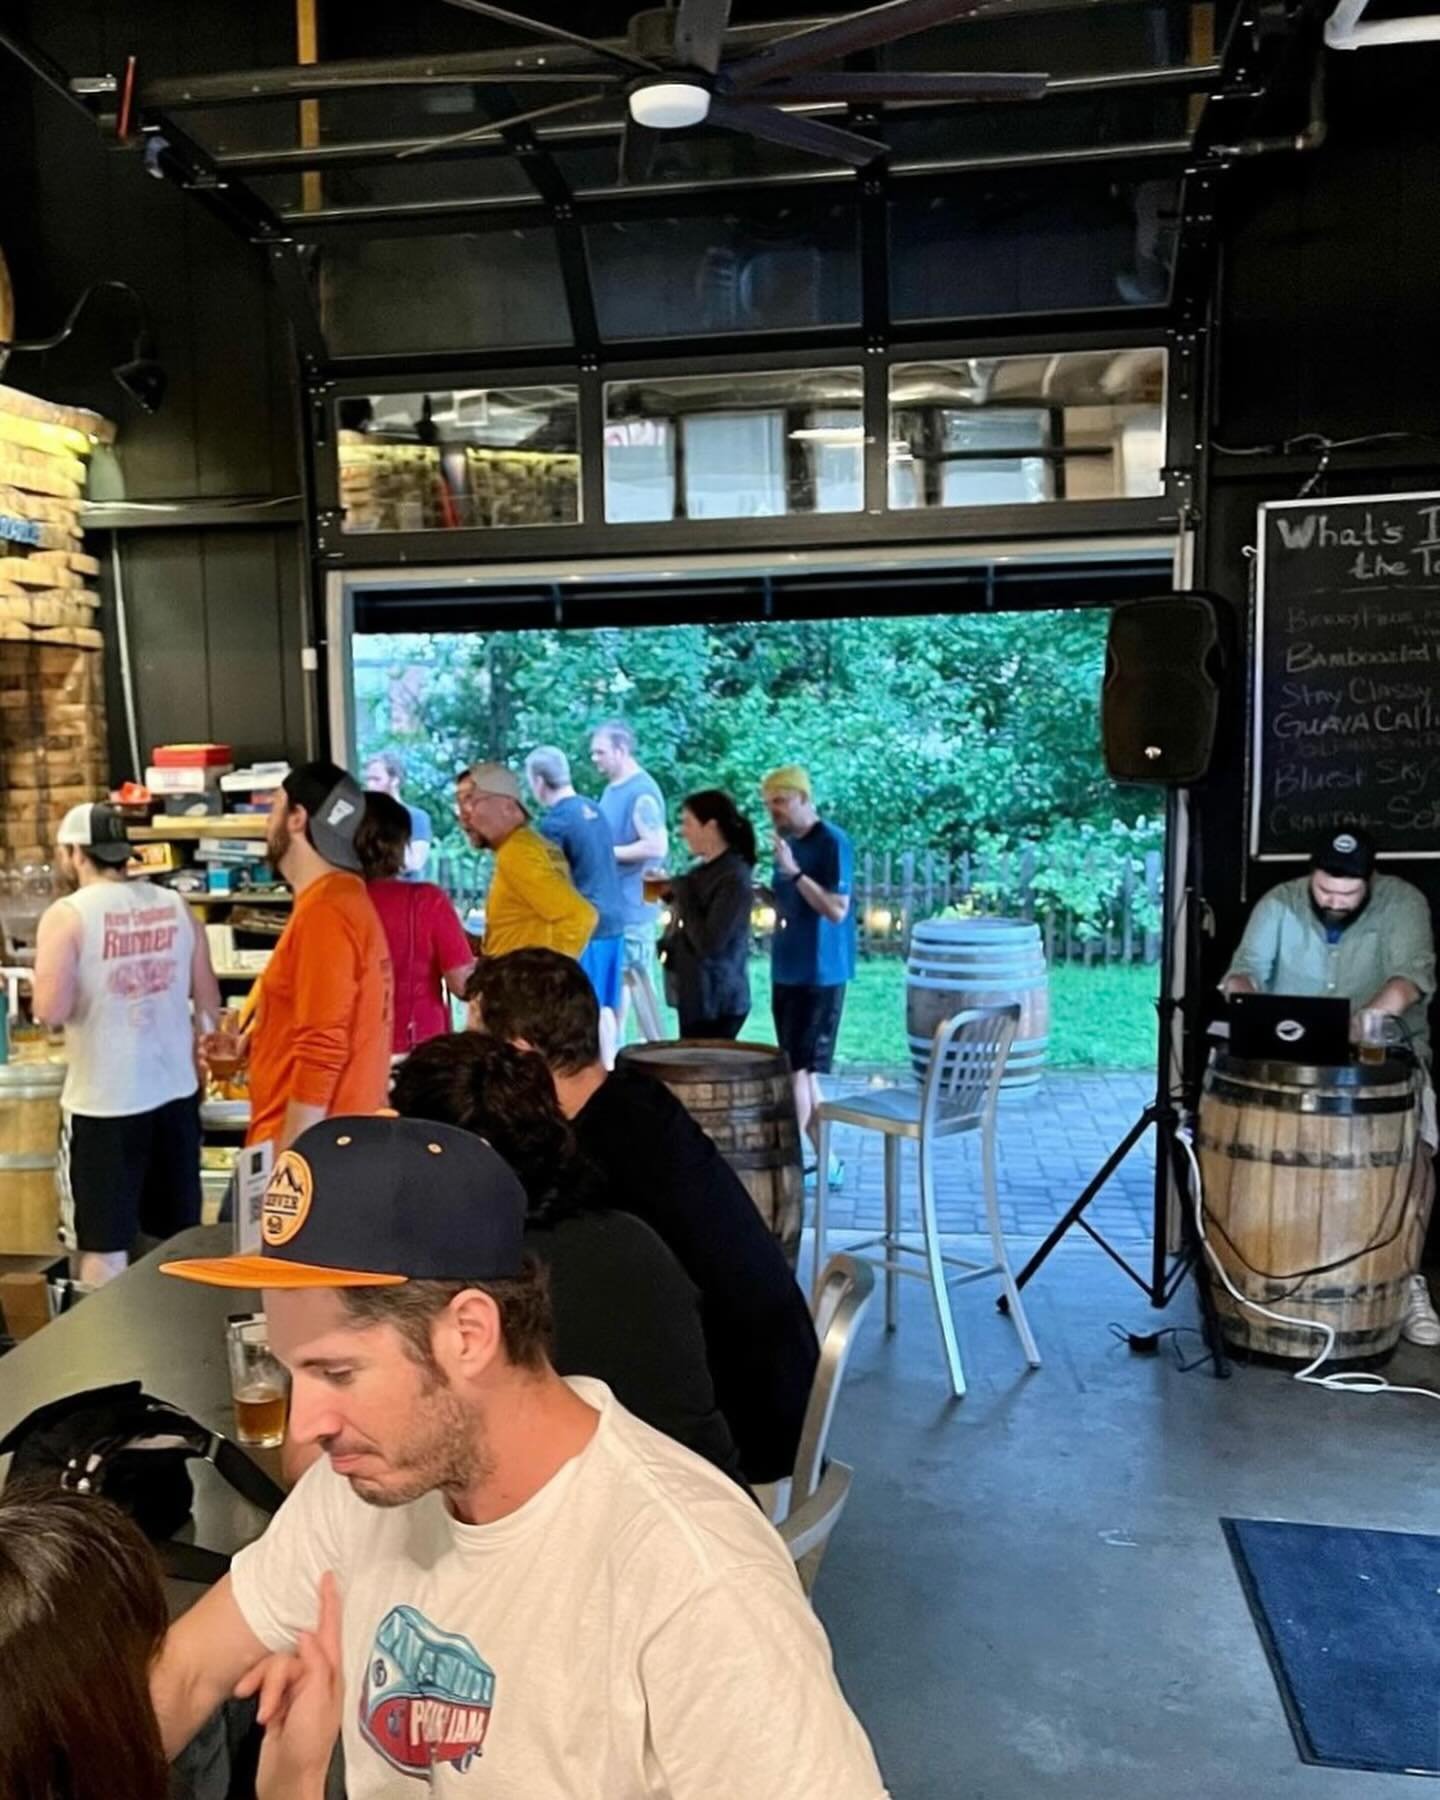 Happy Wednesday! We&rsquo;re excited to welcome @folknfoodtruck who&rsquo;s bringing the music and delicious bites. Music 5-7pm, bites 5pm-sellout, trivia 7-9pm, fresh pours 4-10pm. 

Cheers &amp; see you tonight! 🍻